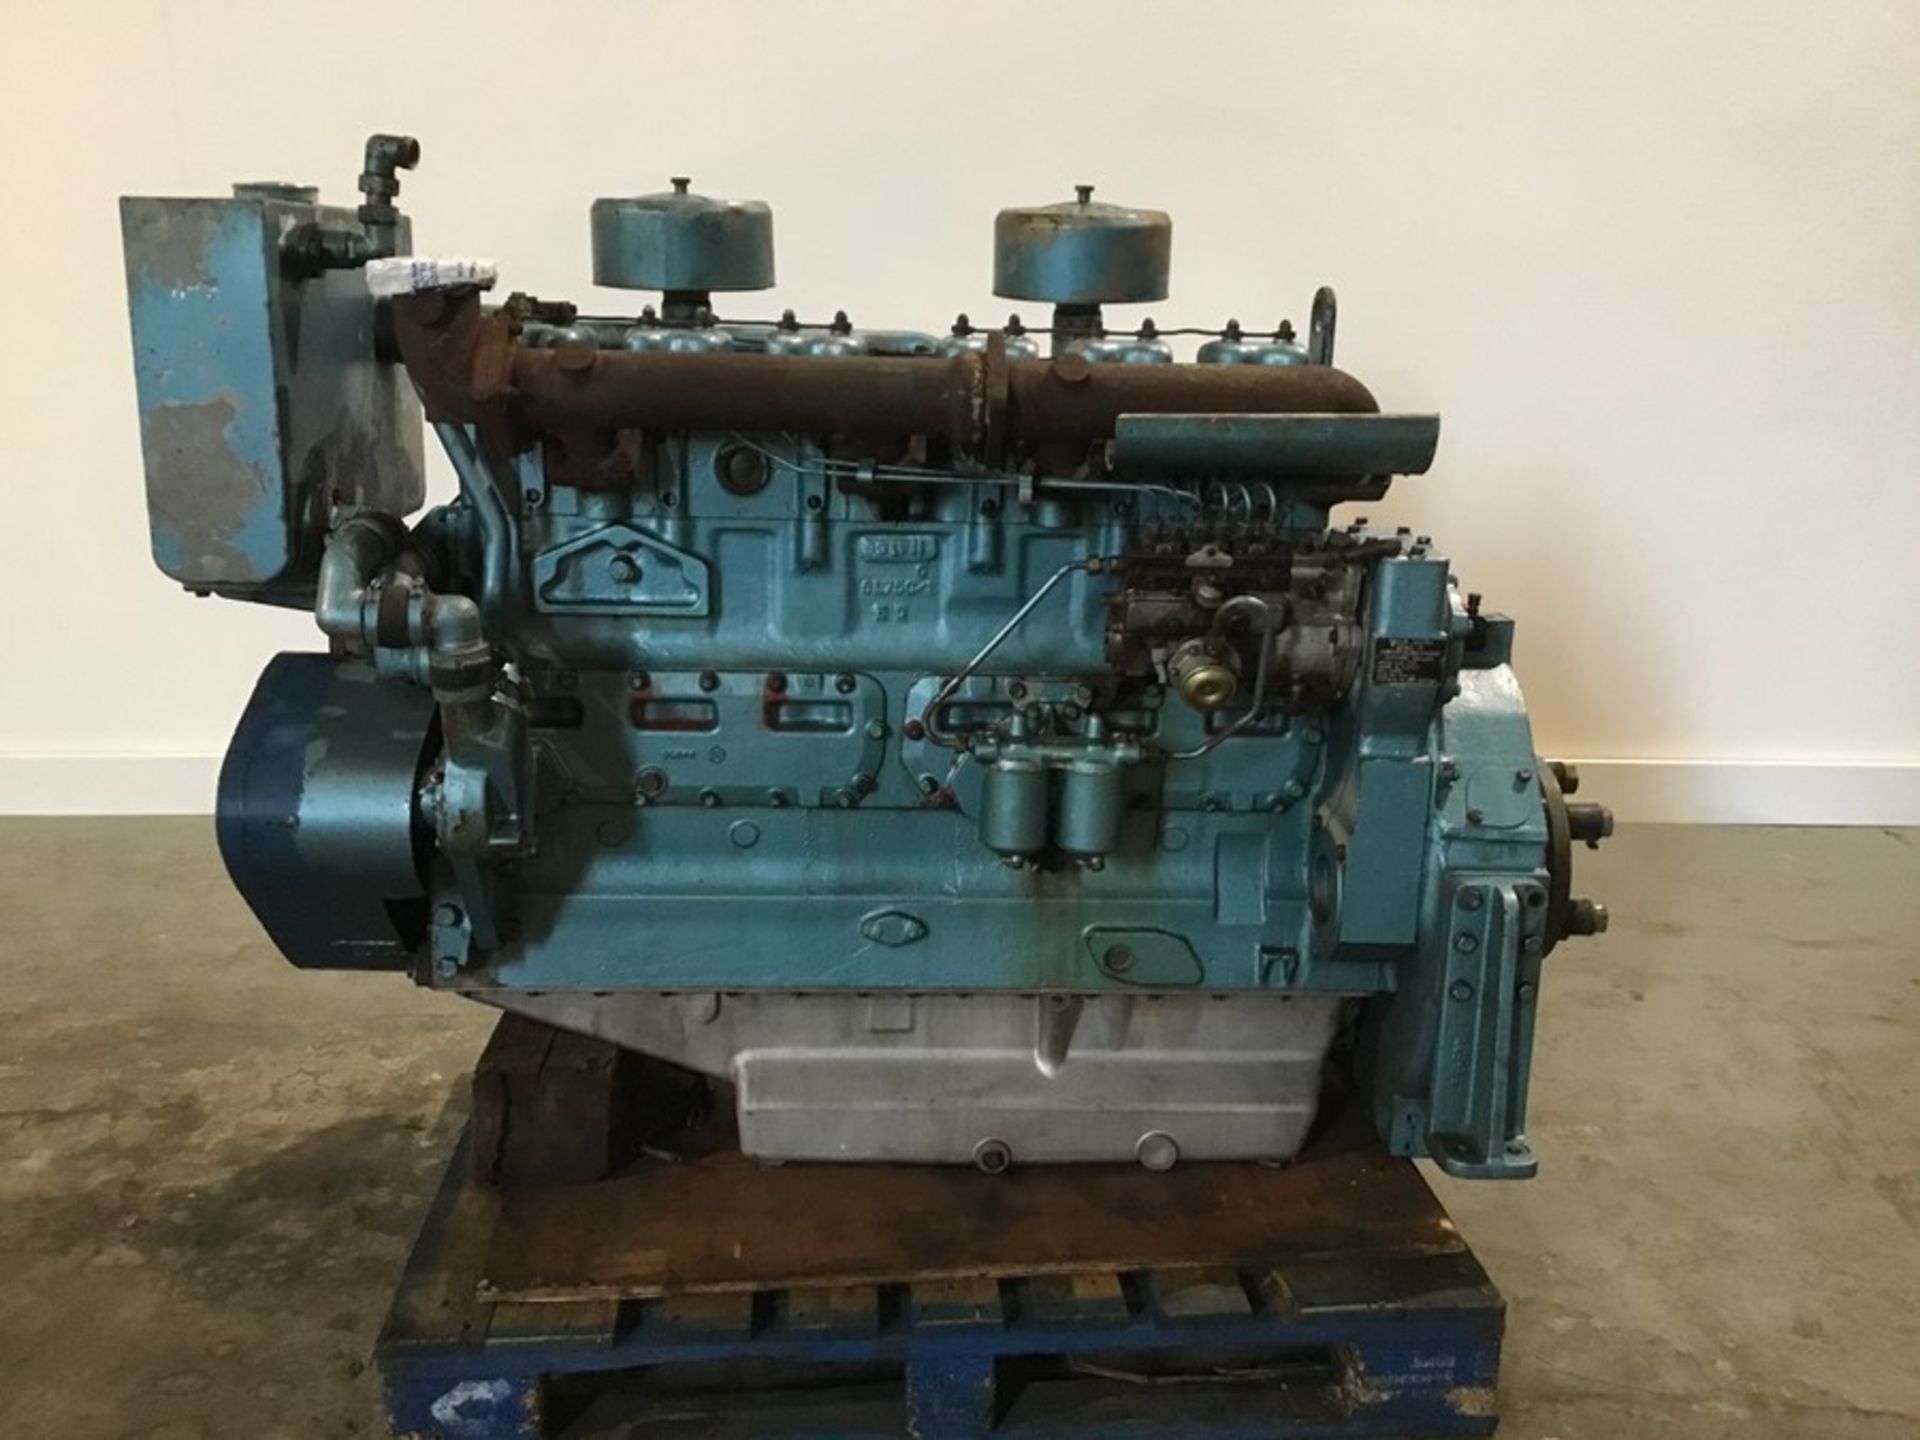 Dorman 6LE Diesel Engine: Dorman 6LE 6cyl Non turbo Serial number 100765 used - Image 10 of 15